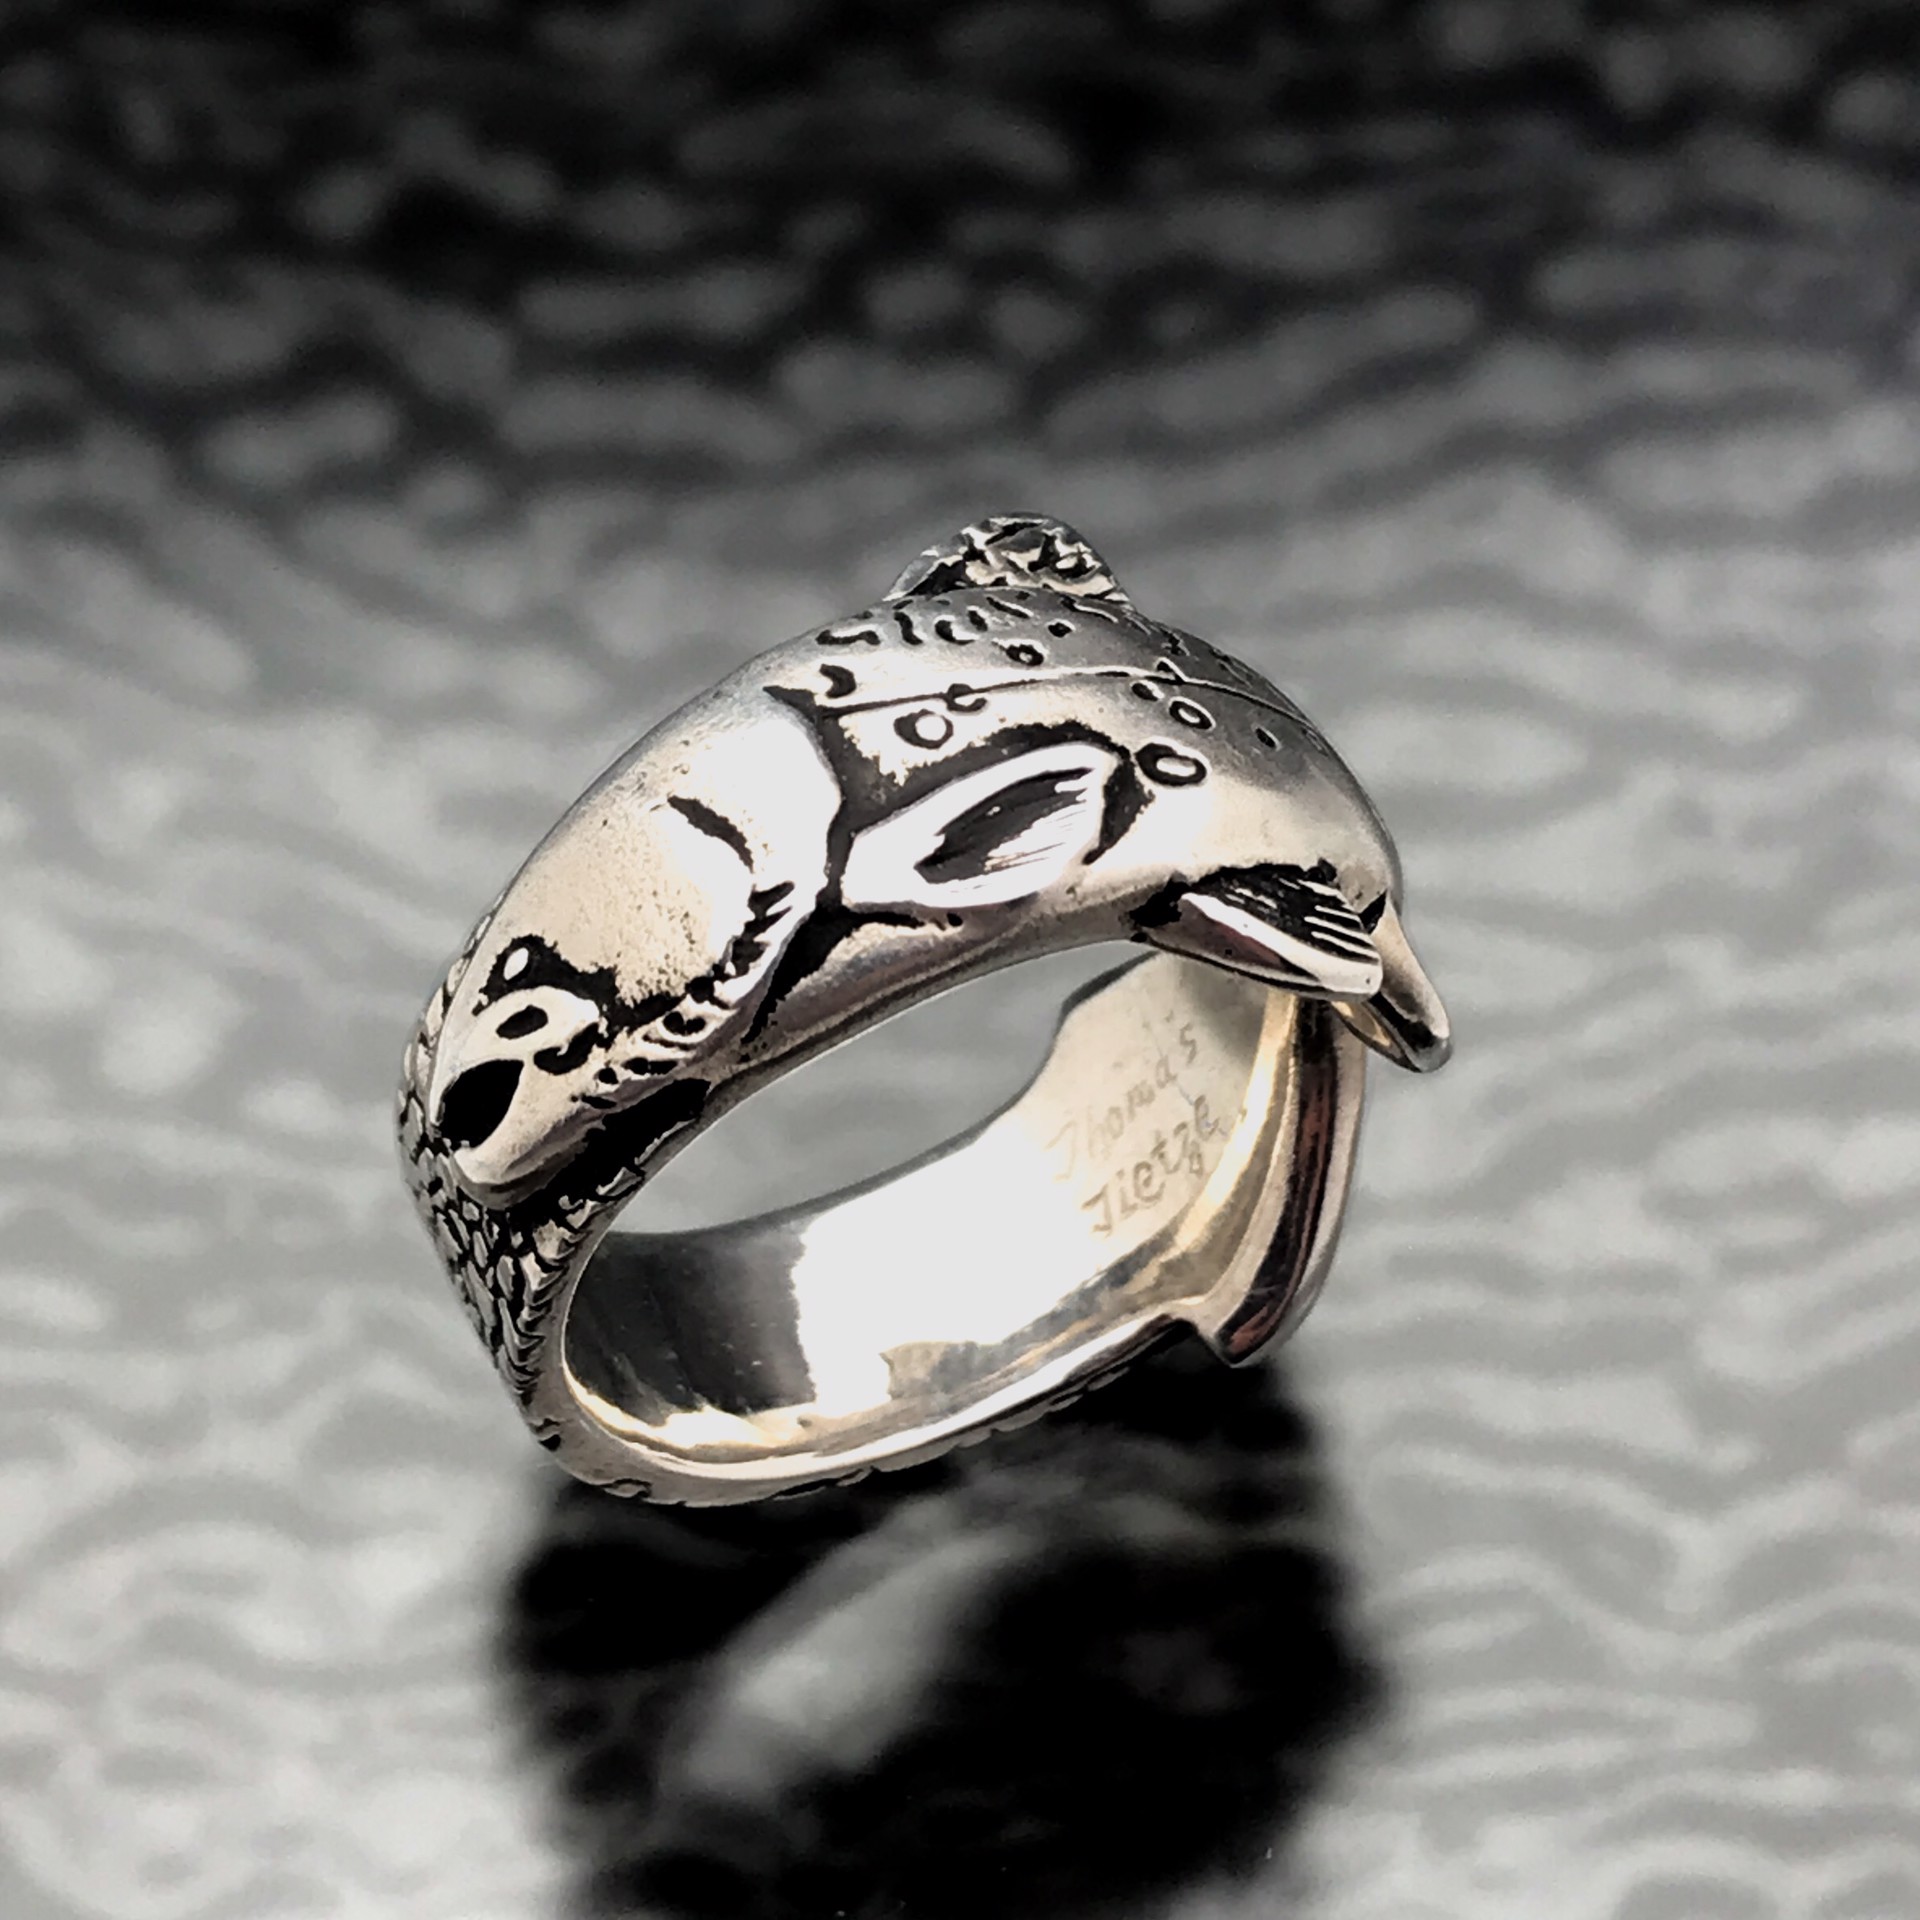 Brook Trout Ring by Thomas Tietze